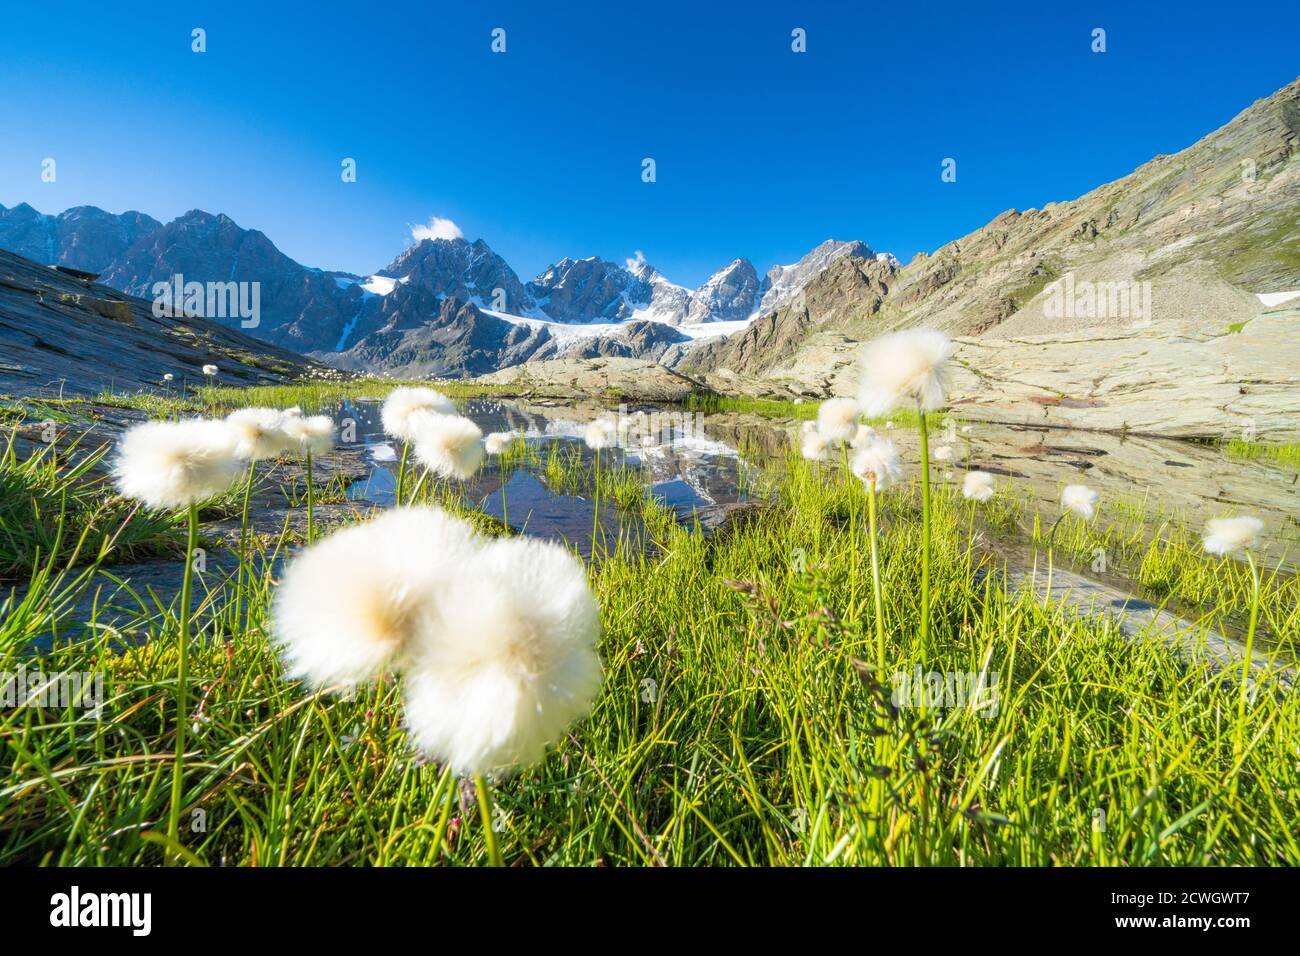 Cotton grass on shores of Forbici lake with peaks of Bernina Group on background, Valmalenco, Valtellina, Lombardy, Italy Stock Photo